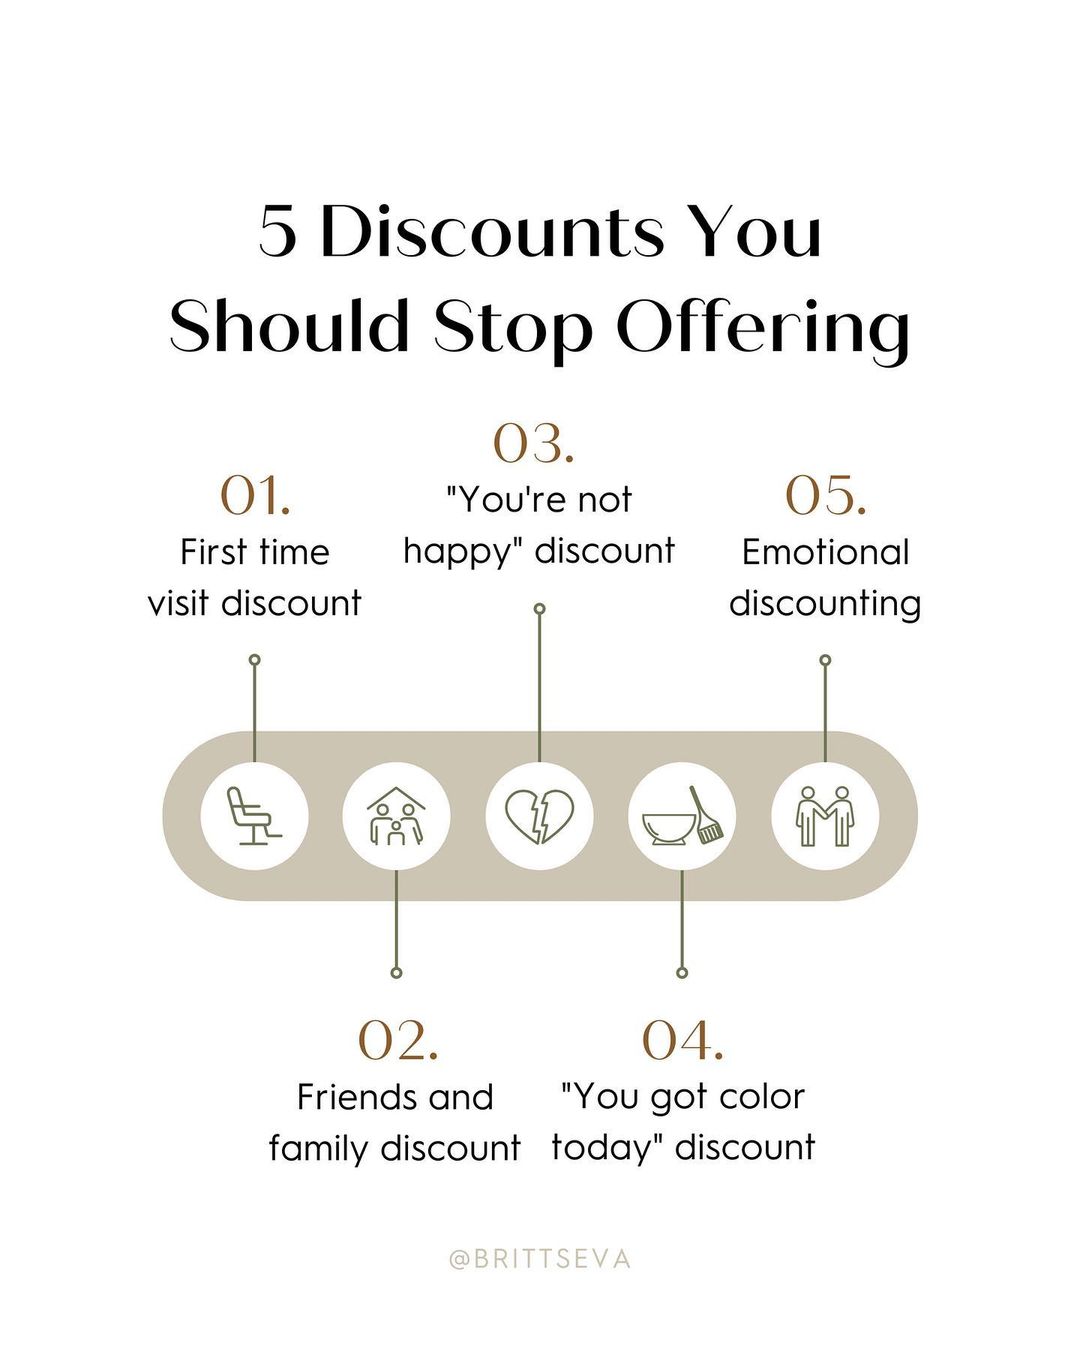 5 Discounts You Should Stop Offering